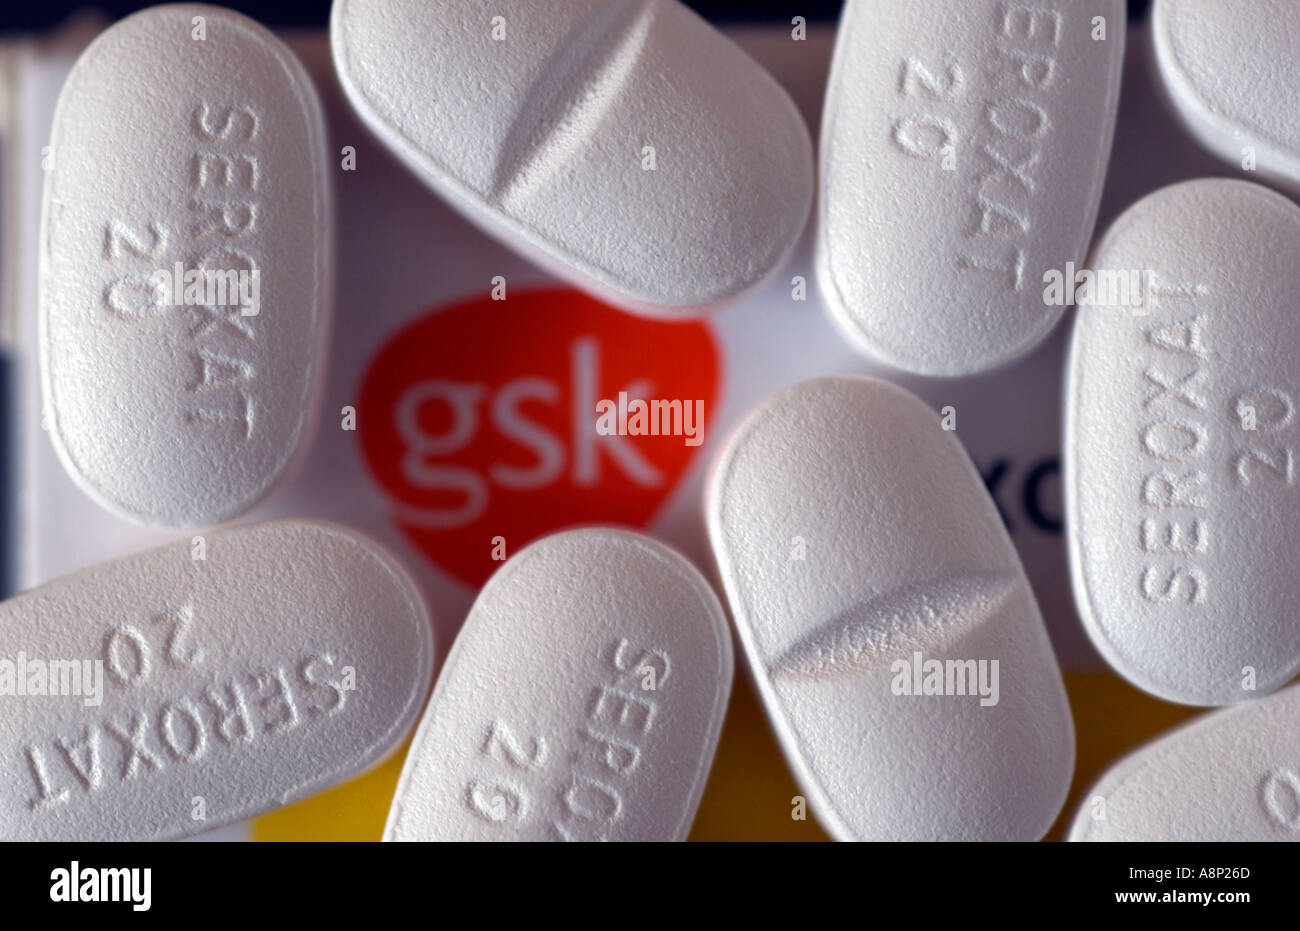 Seroxat tablets and packet Stock Photo